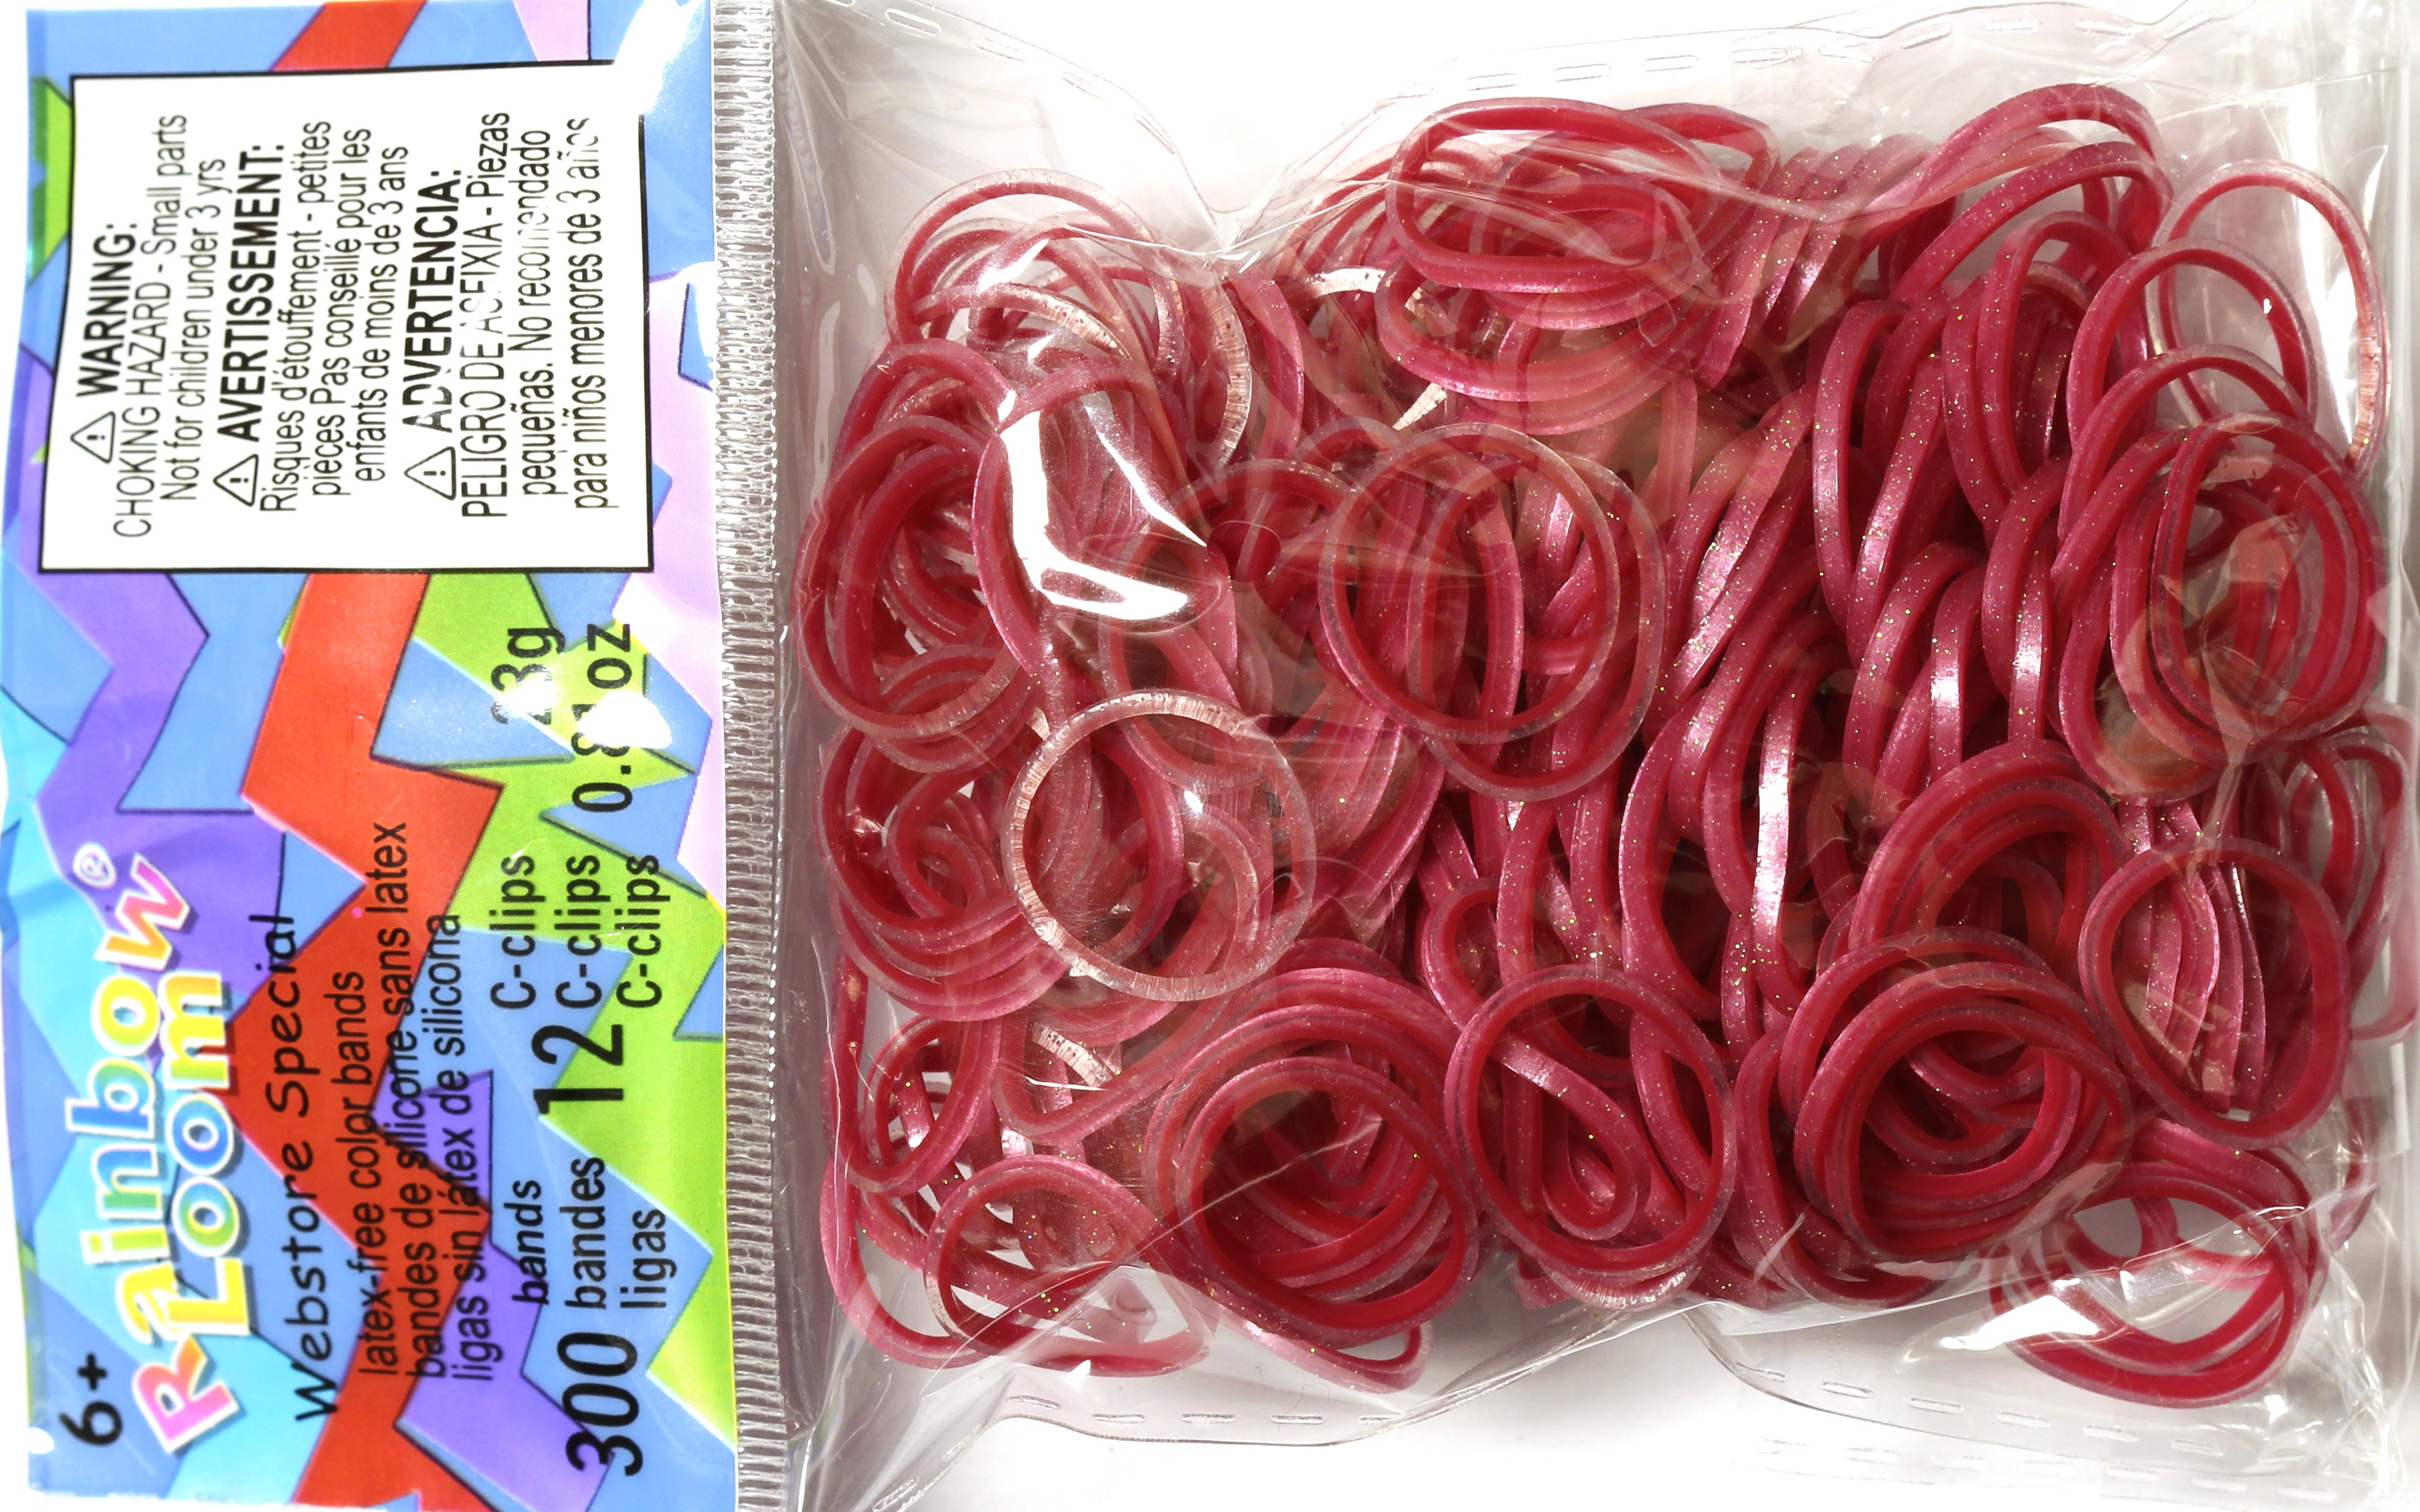 Rainbow Loom Pearl Sparkle Maroon Rubber Bands Refill Pack [600 ct]